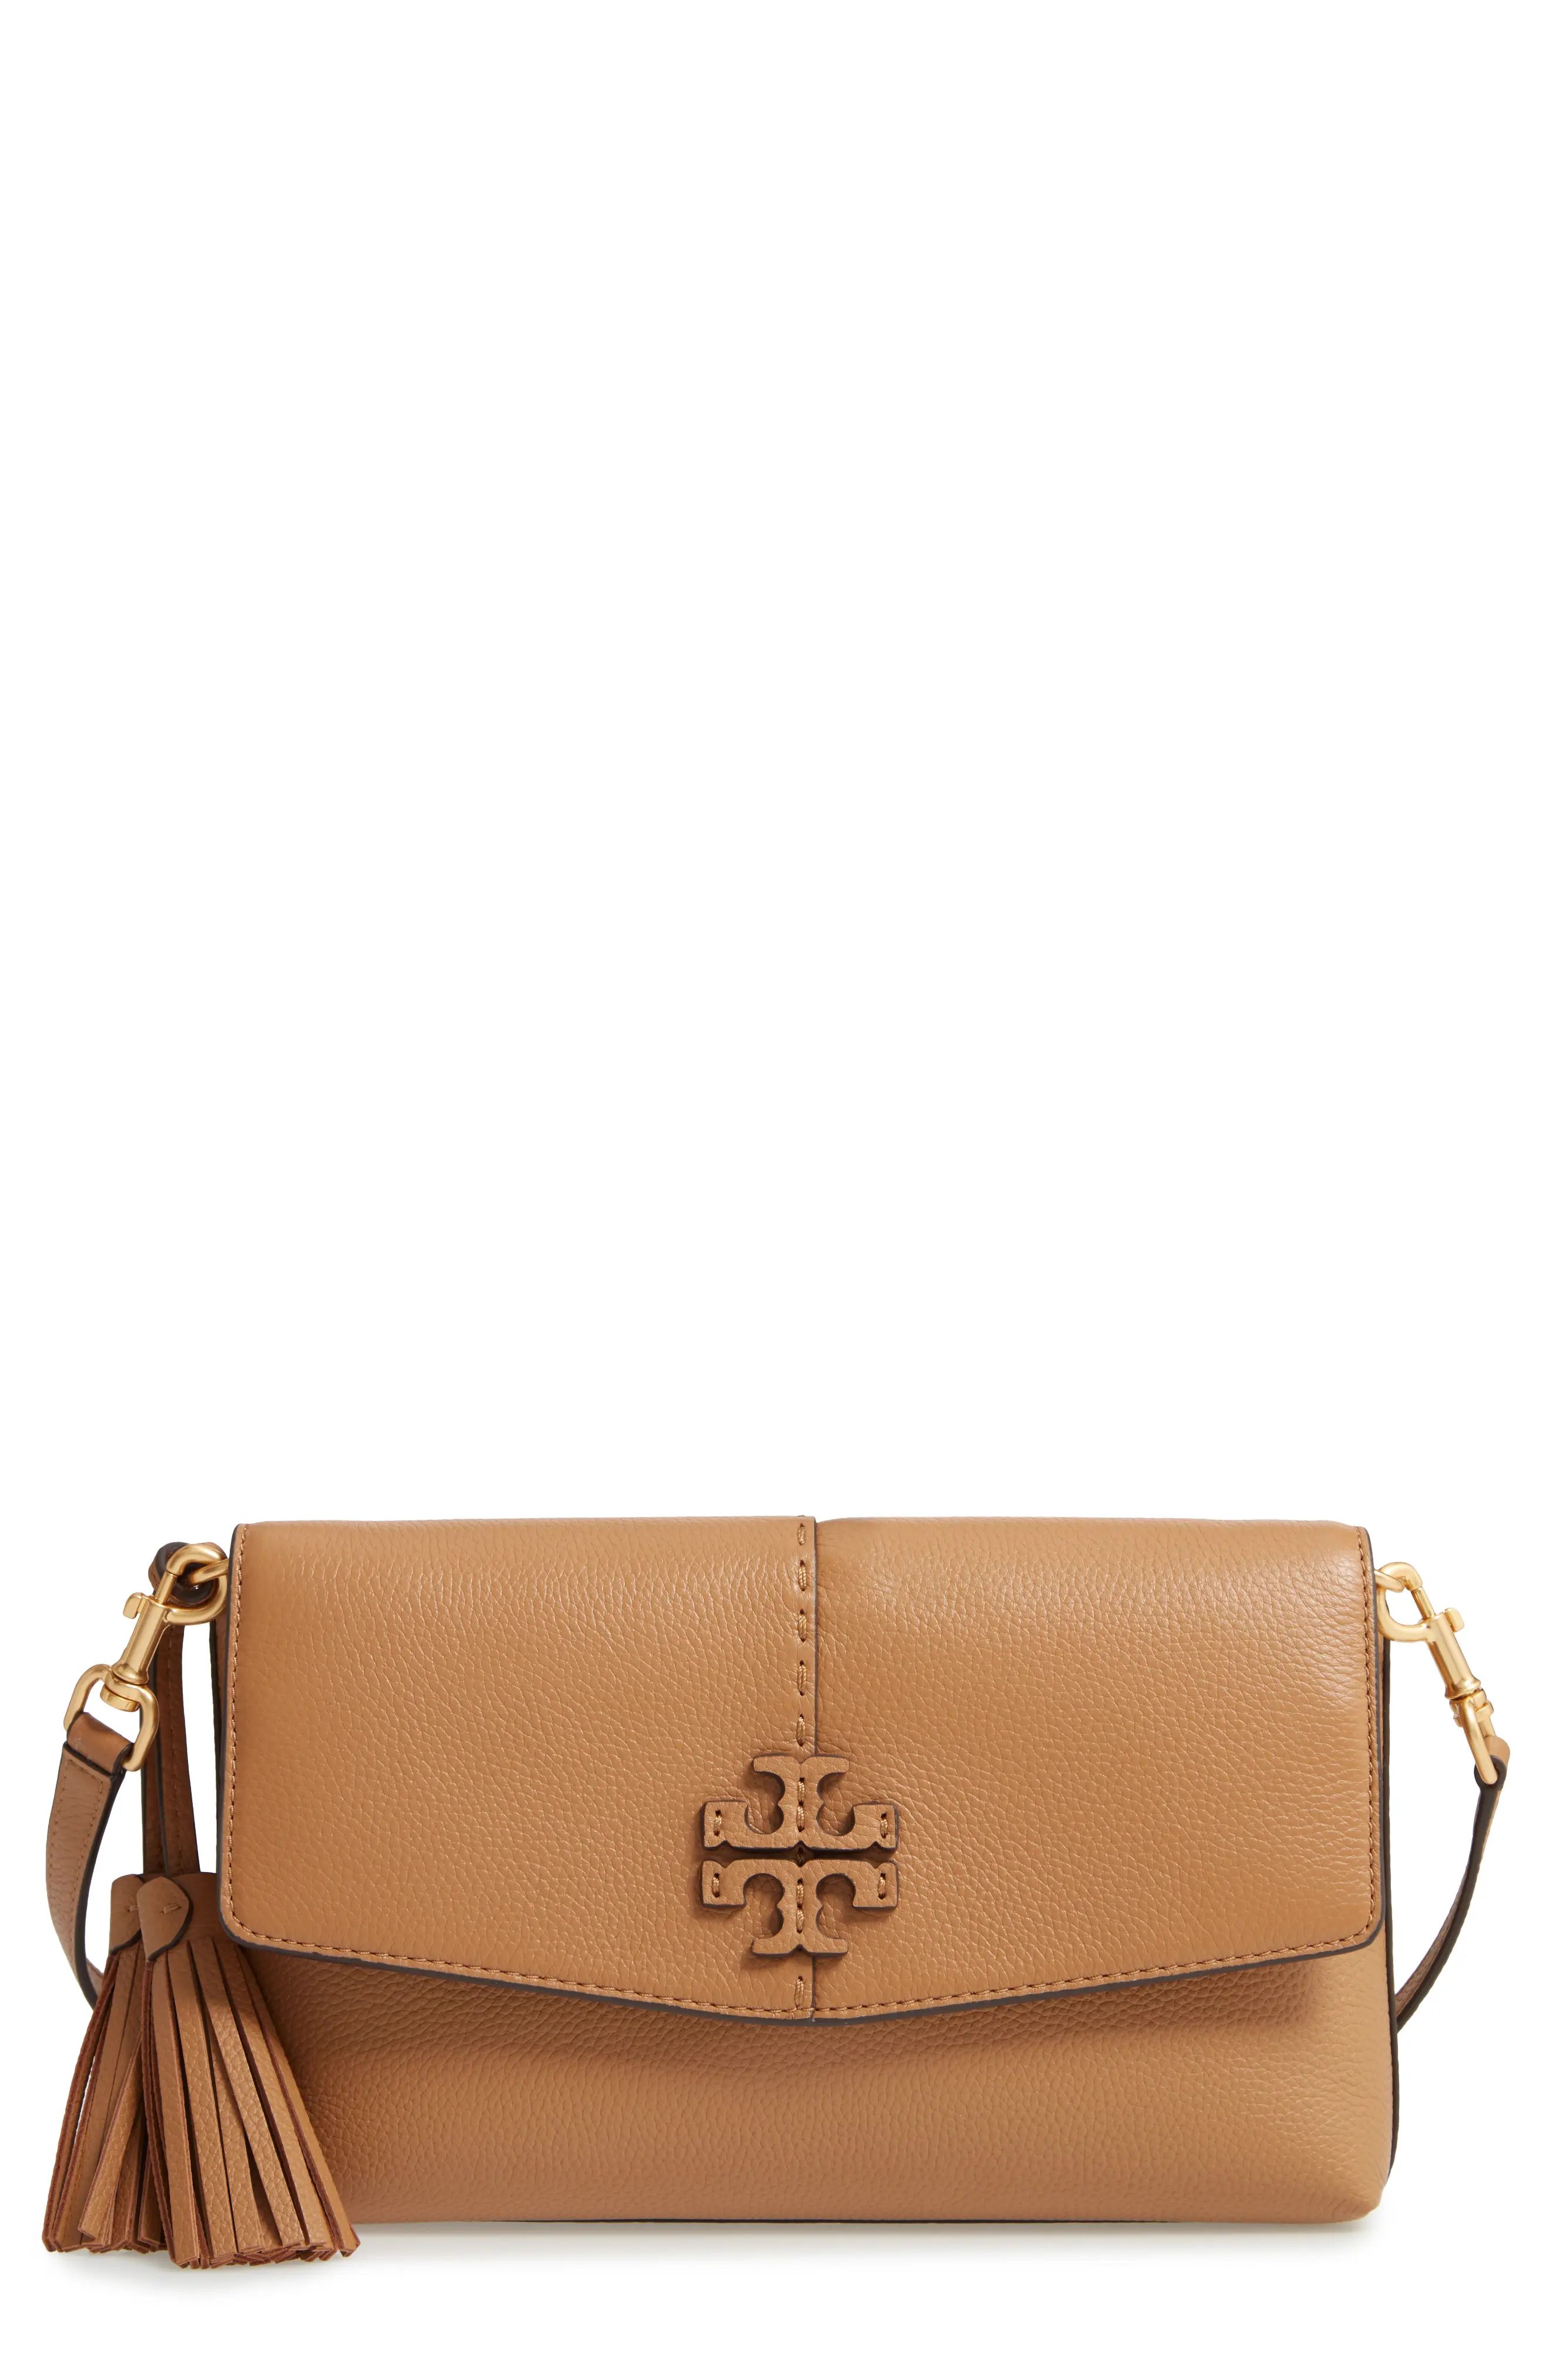 Tory Burch Mcgraw Leather Crossbody Bag - Brown | Nordstrom